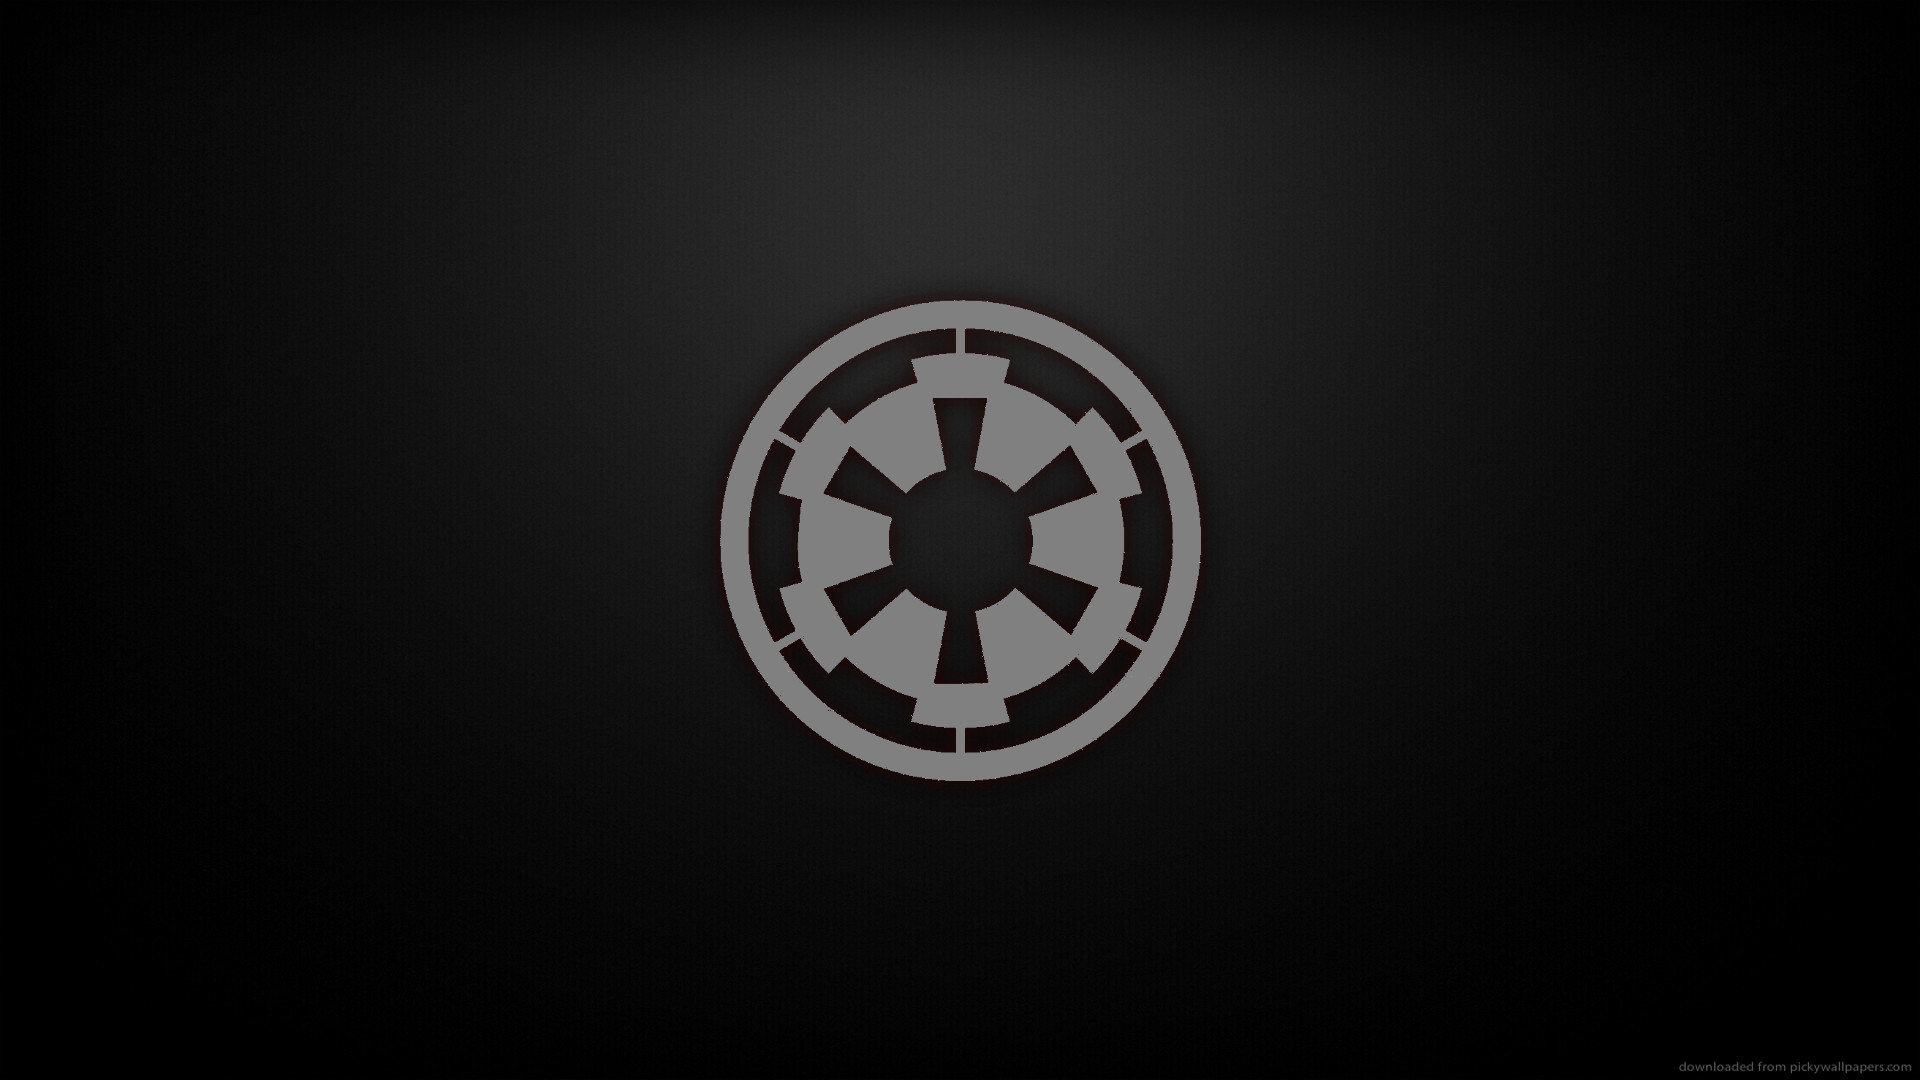 The Mandalorian Star Wars Logo 4k HD Tv Shows 4k Wallpapers Images  Backgrounds Photos and Pictures